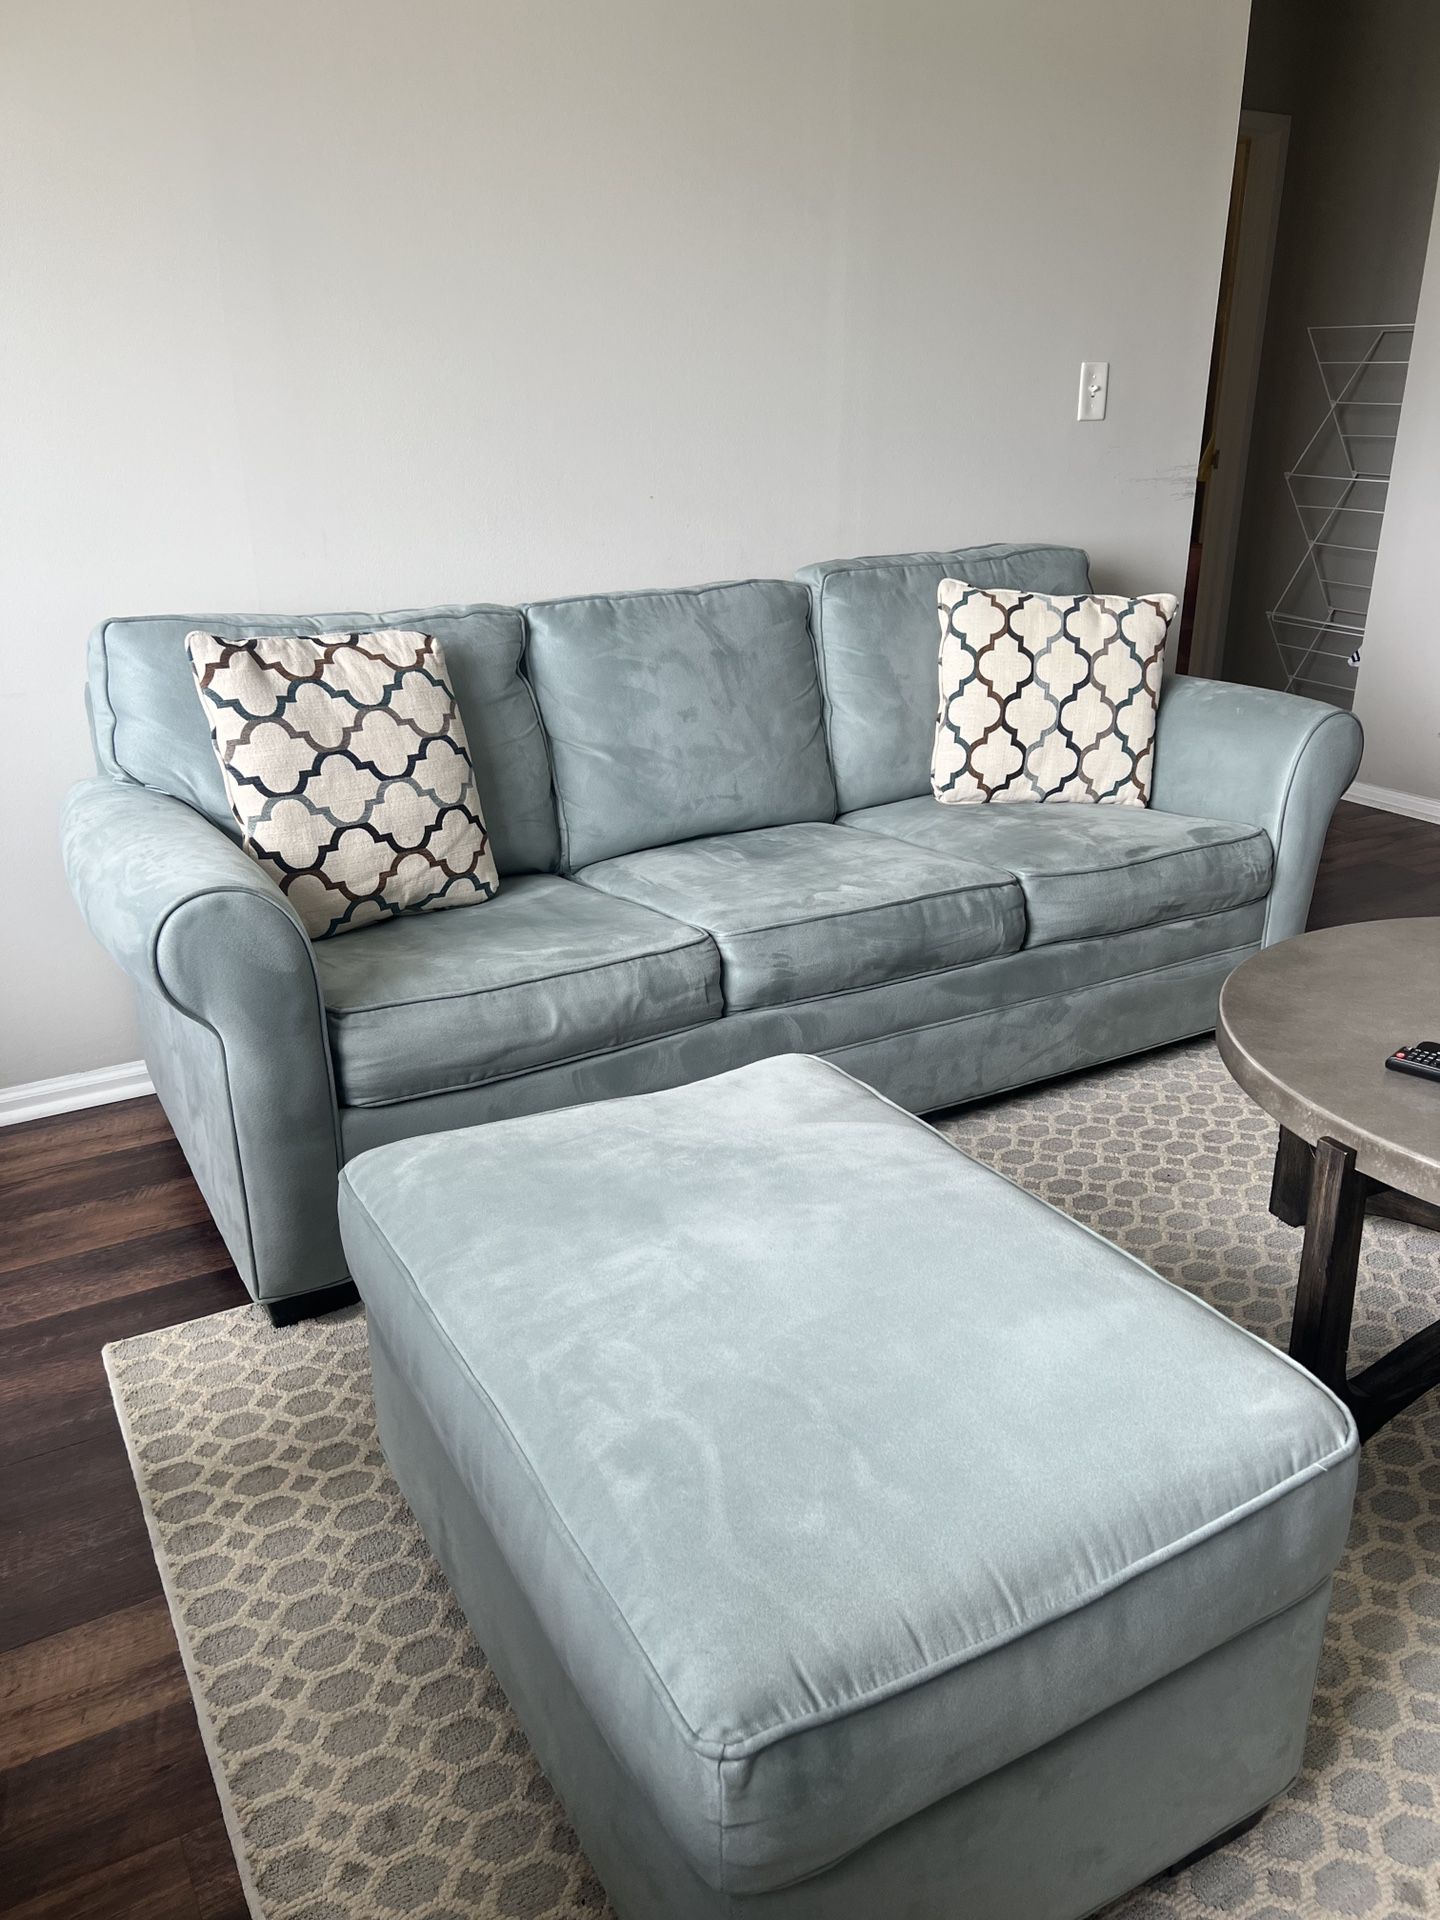 Selling Glendora Queen Microfiber Sleeper Sofa, from Raymour and Flanigan.  L: 88.5 x W: 37.5 x H: 37 Light blue -Suede/Microfiber/Matress size: Queen